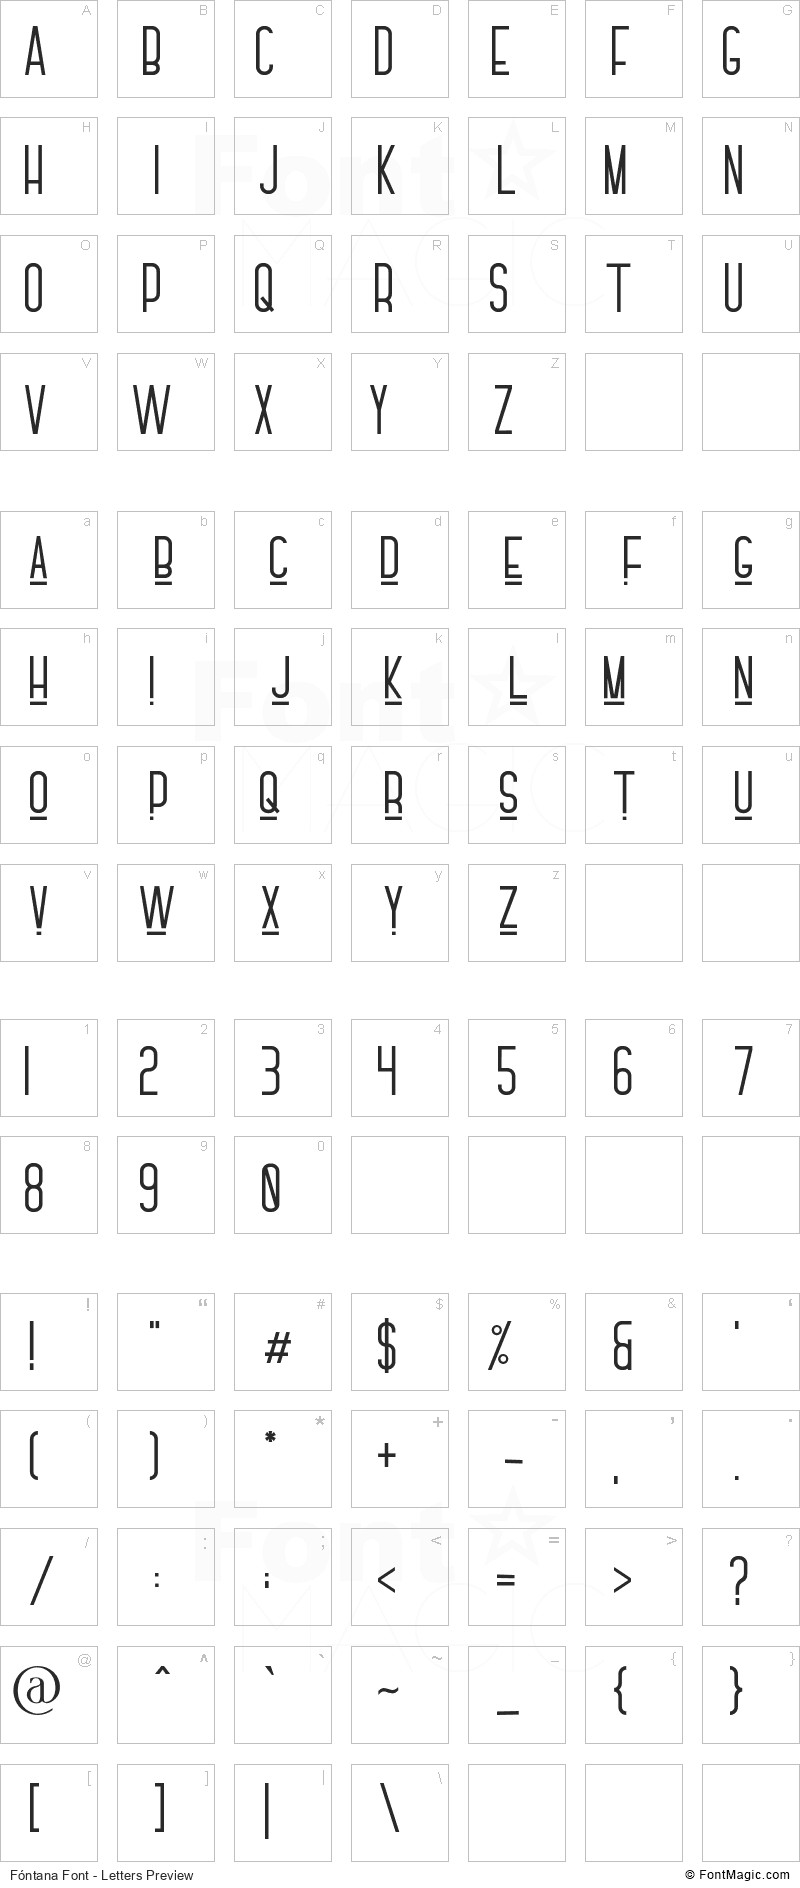 Fóntana Font - All Latters Preview Chart